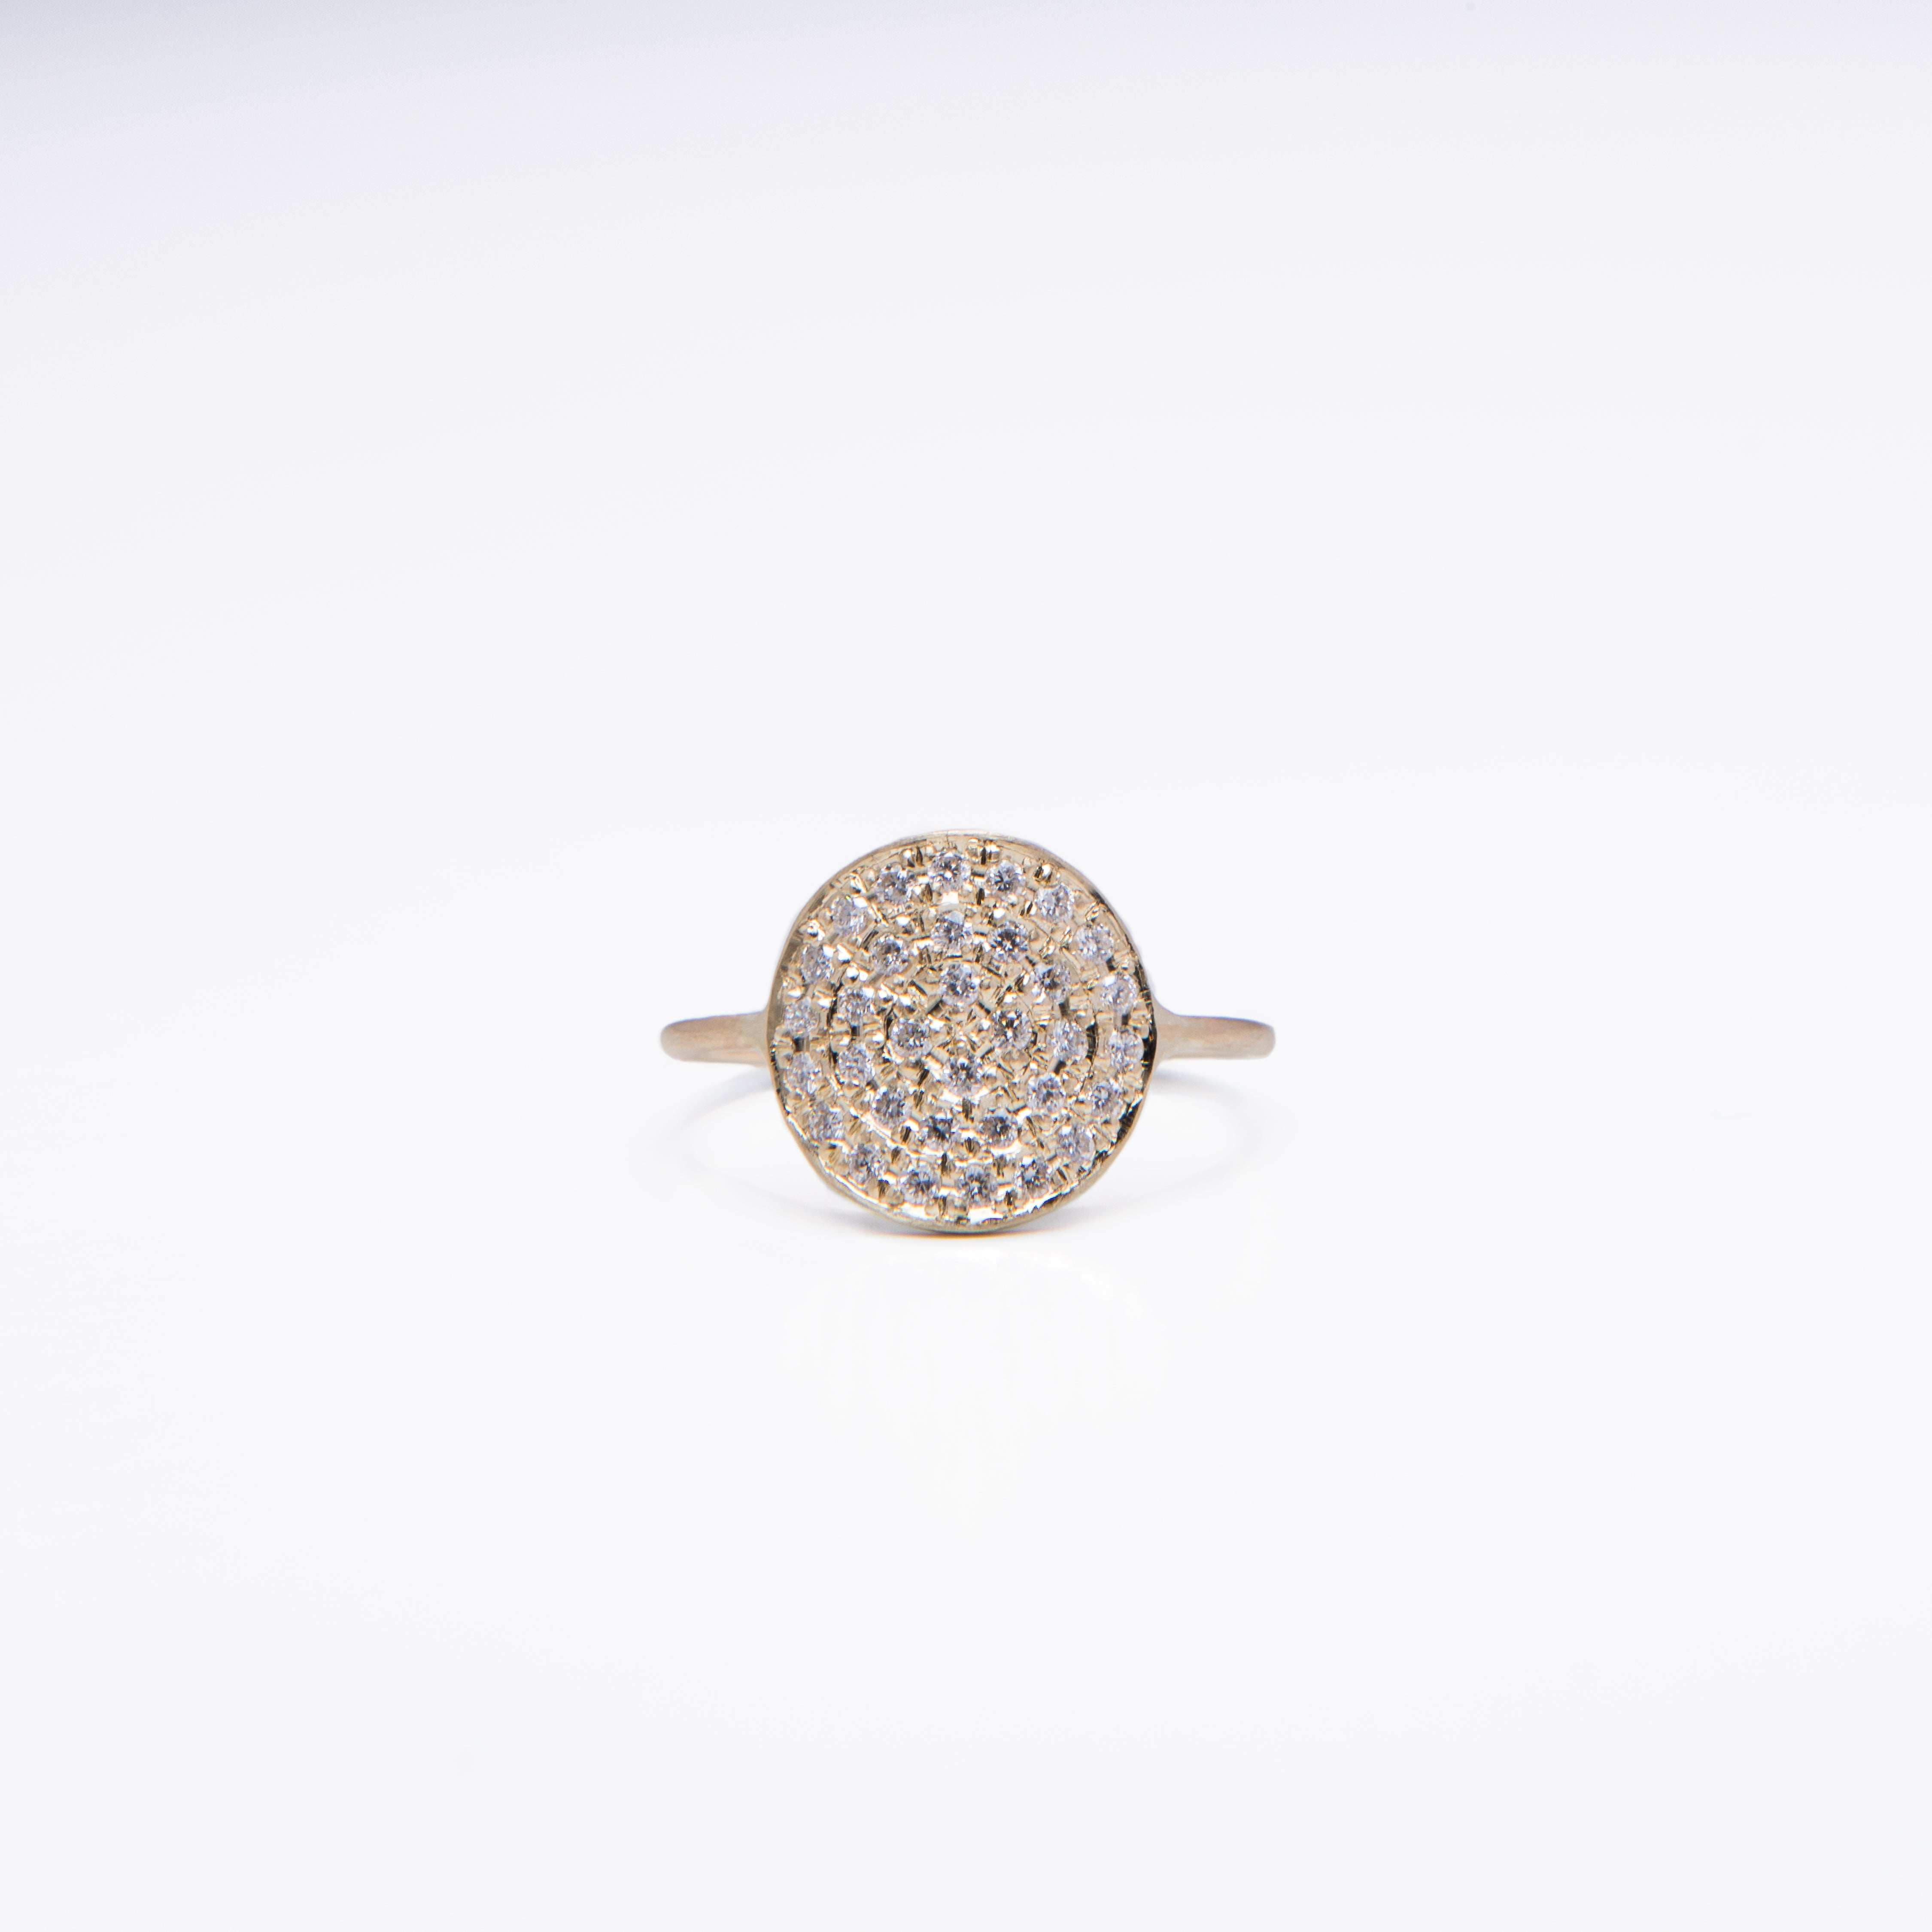 WD152 14kt diamond The Curved Pave disk ring